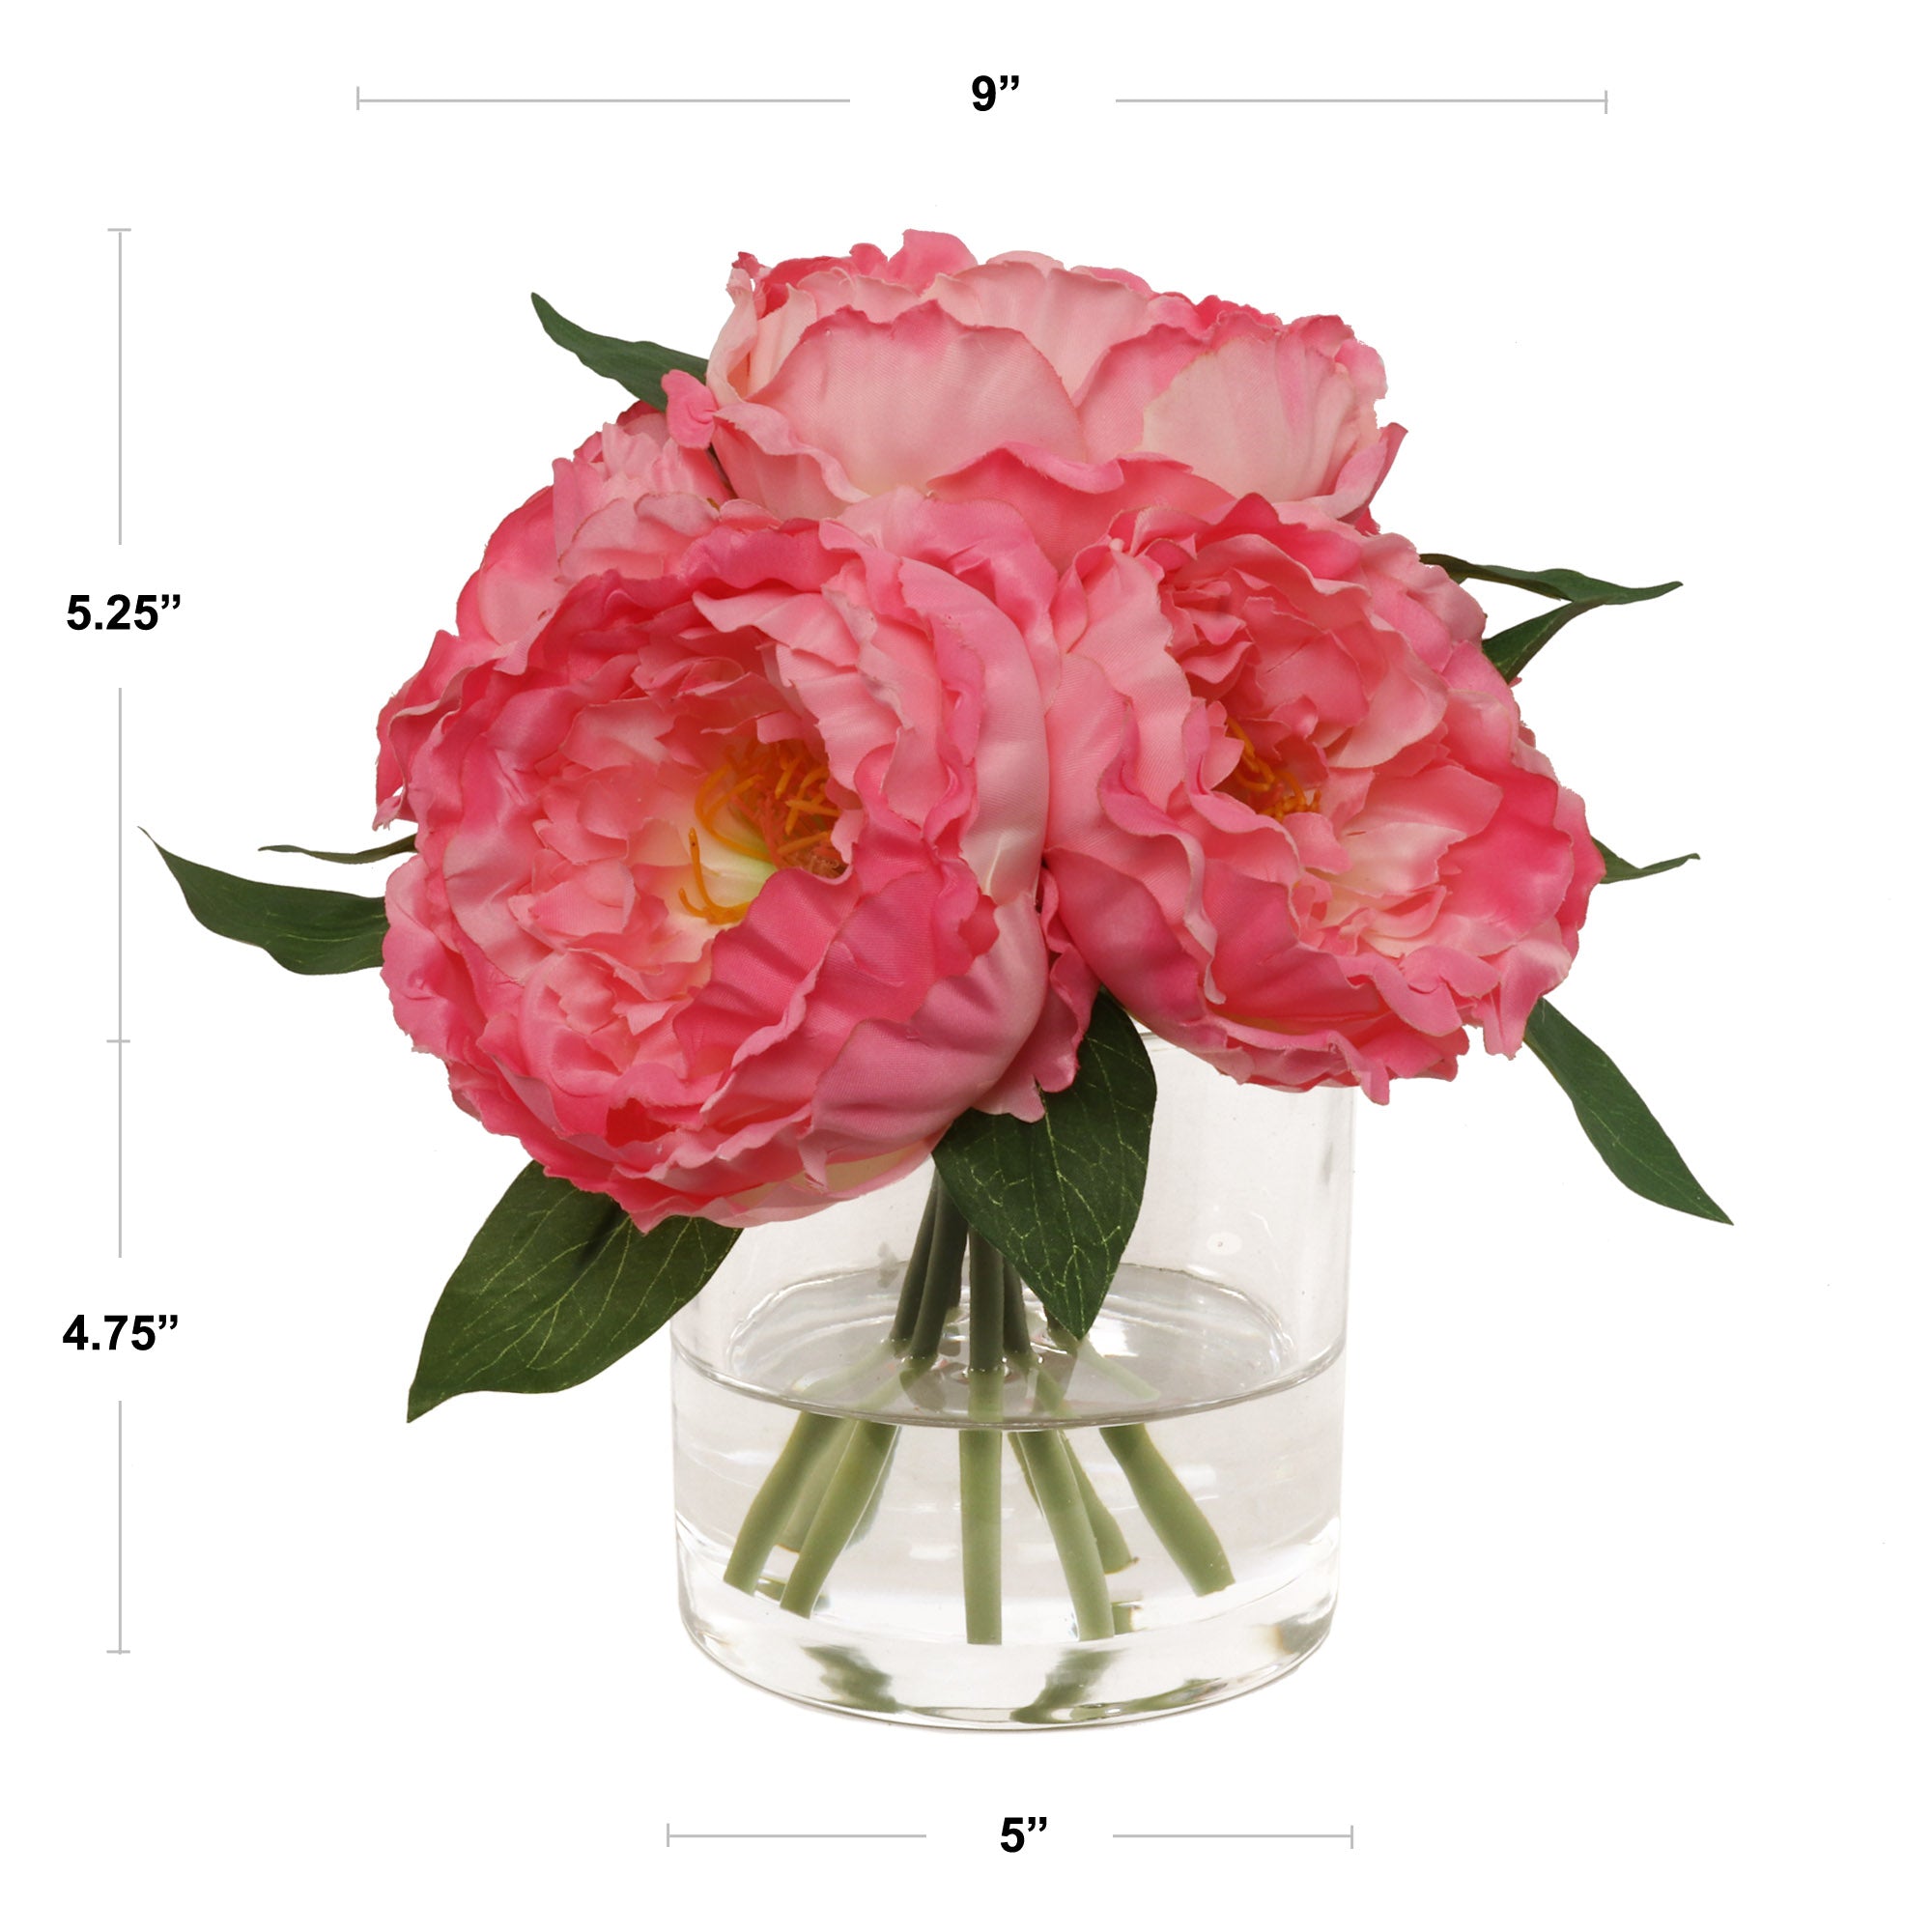 Luxury Essence Artificial Pink Peony Arrangement with 7 Fronds in Elegant Glass Vase - Real Looking Faux Floral Centerpiece for Home Decor, Office Enhancement, Wedding Tables, or Sophisticated Gift